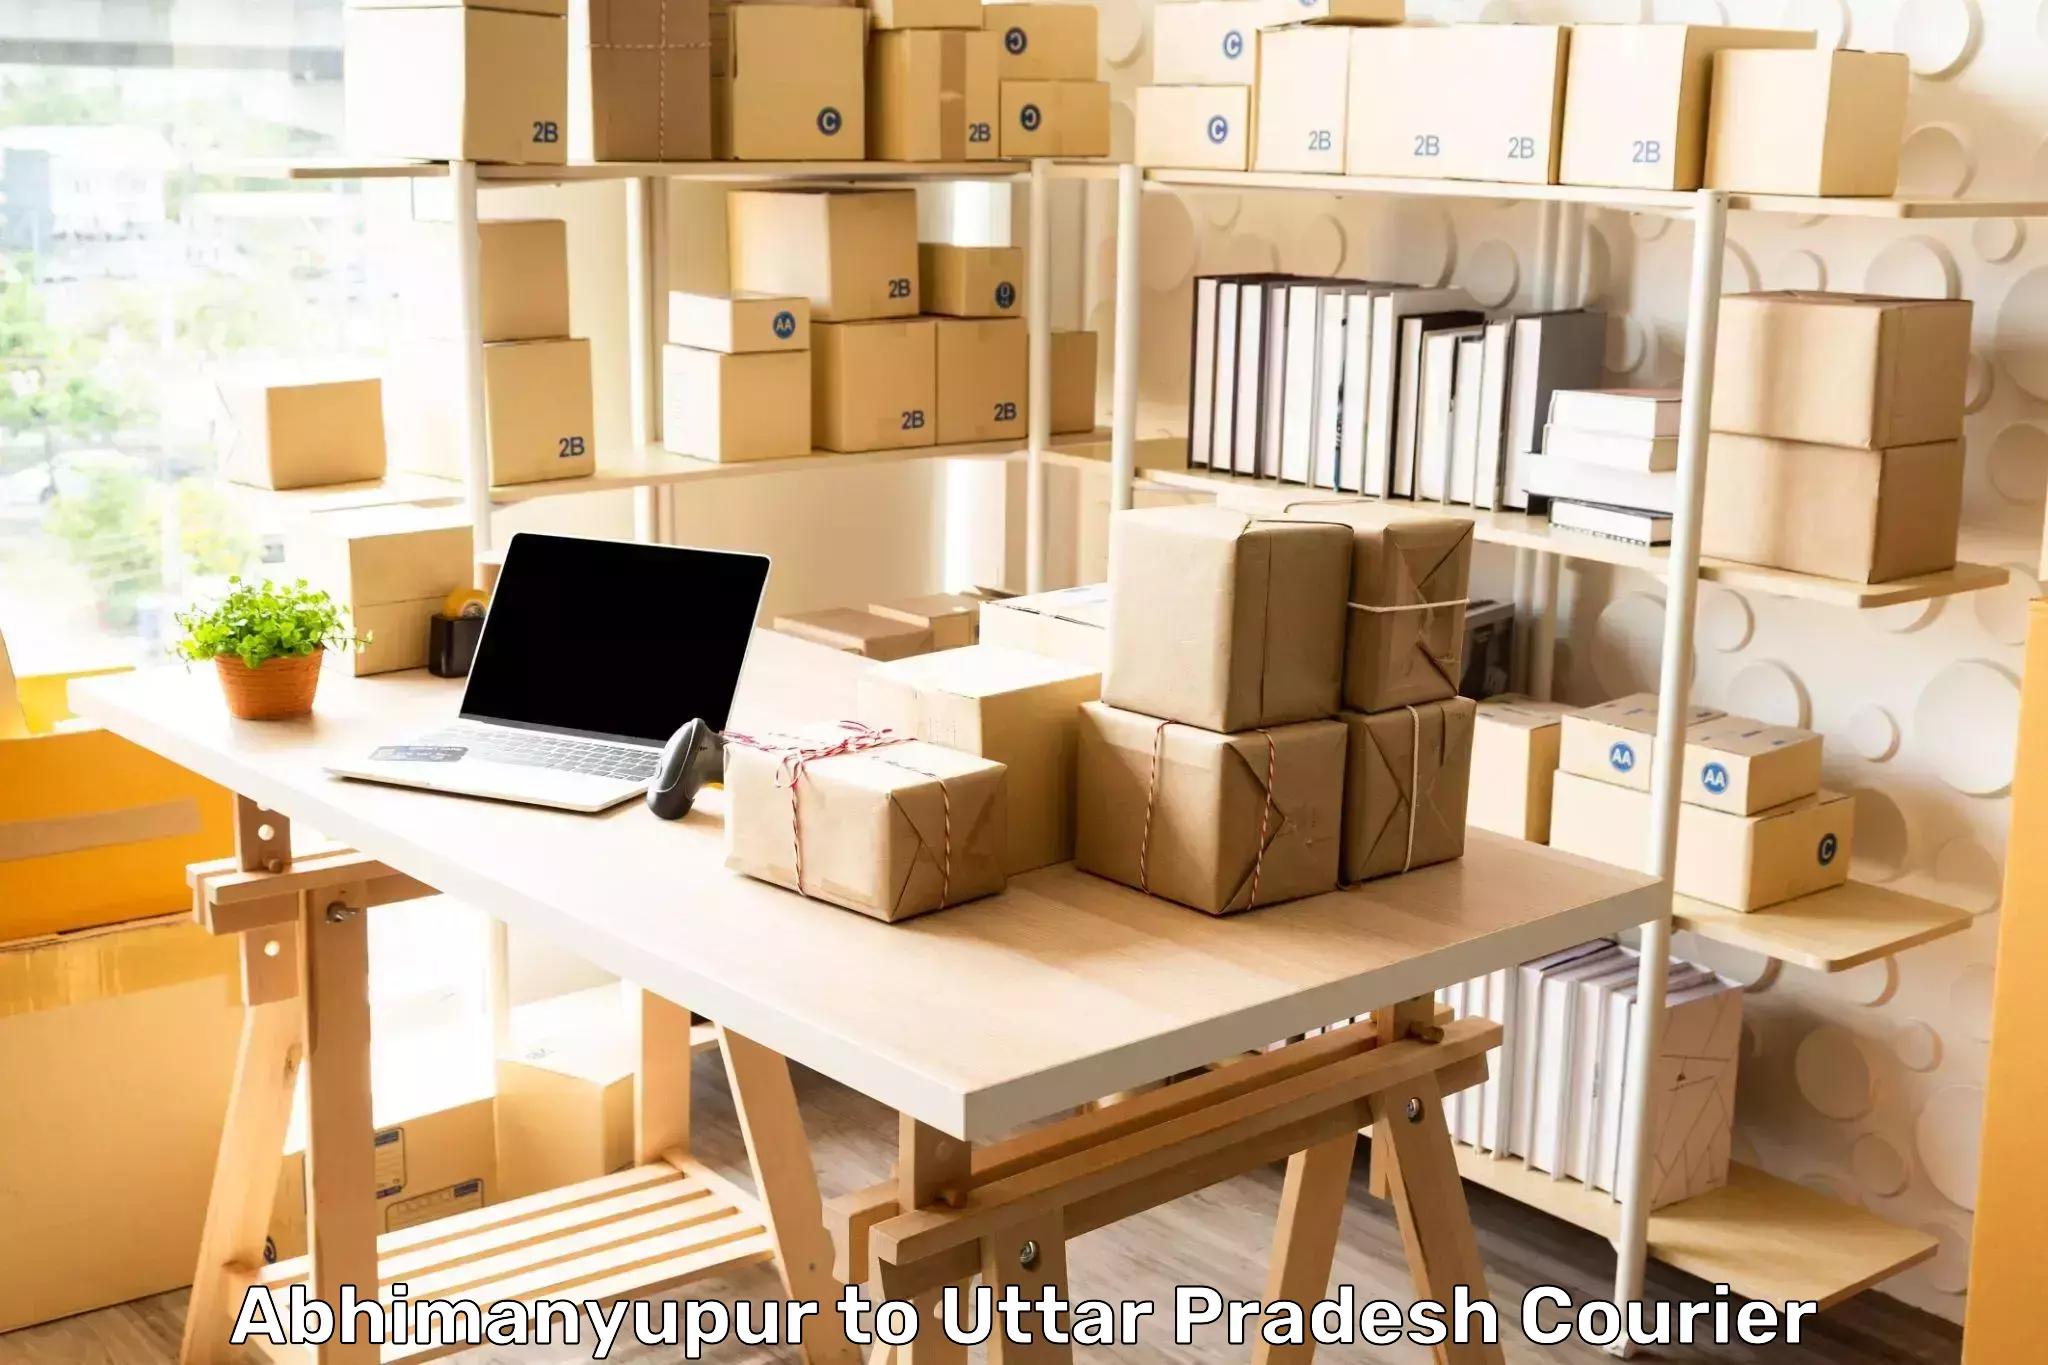 Cost-effective shipping solutions in Abhimanyupur to Uttar Pradesh